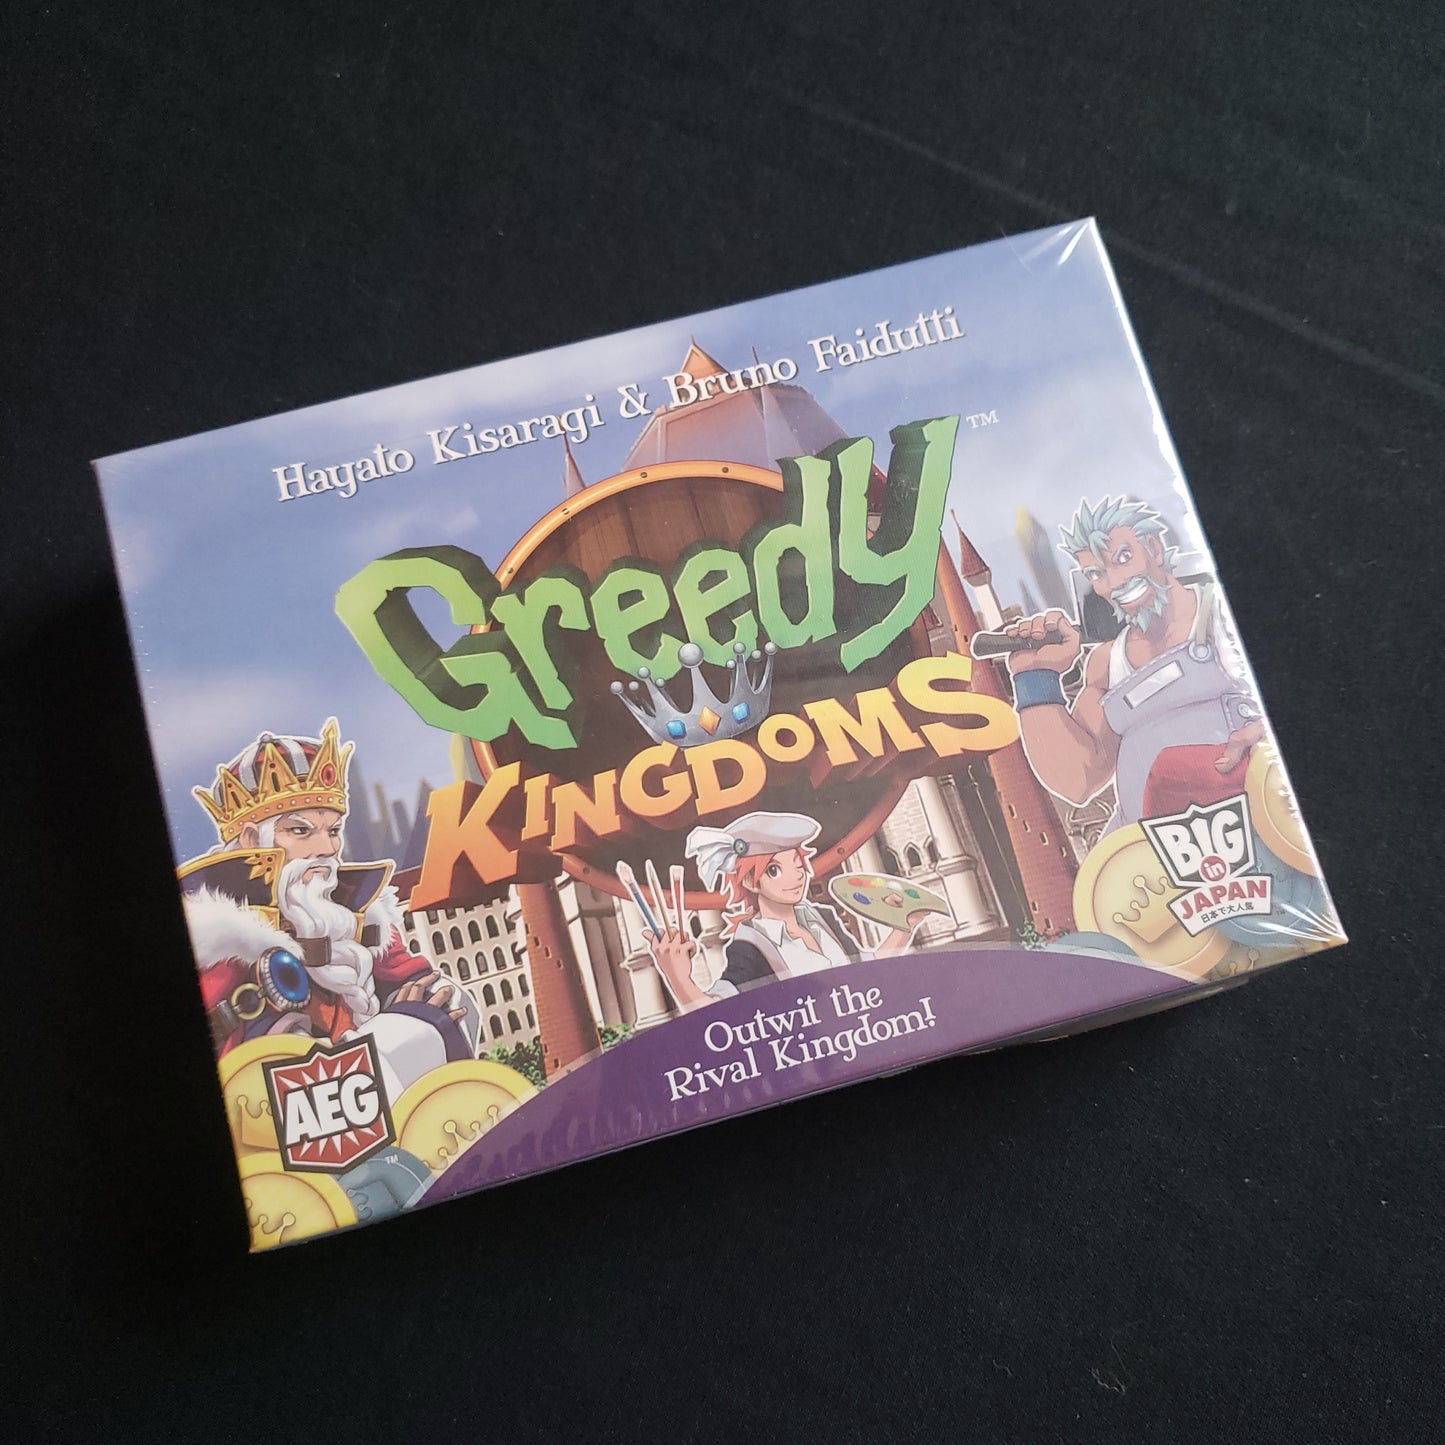 Image shows the front cover of the box of the Greedy Kingdoms board game